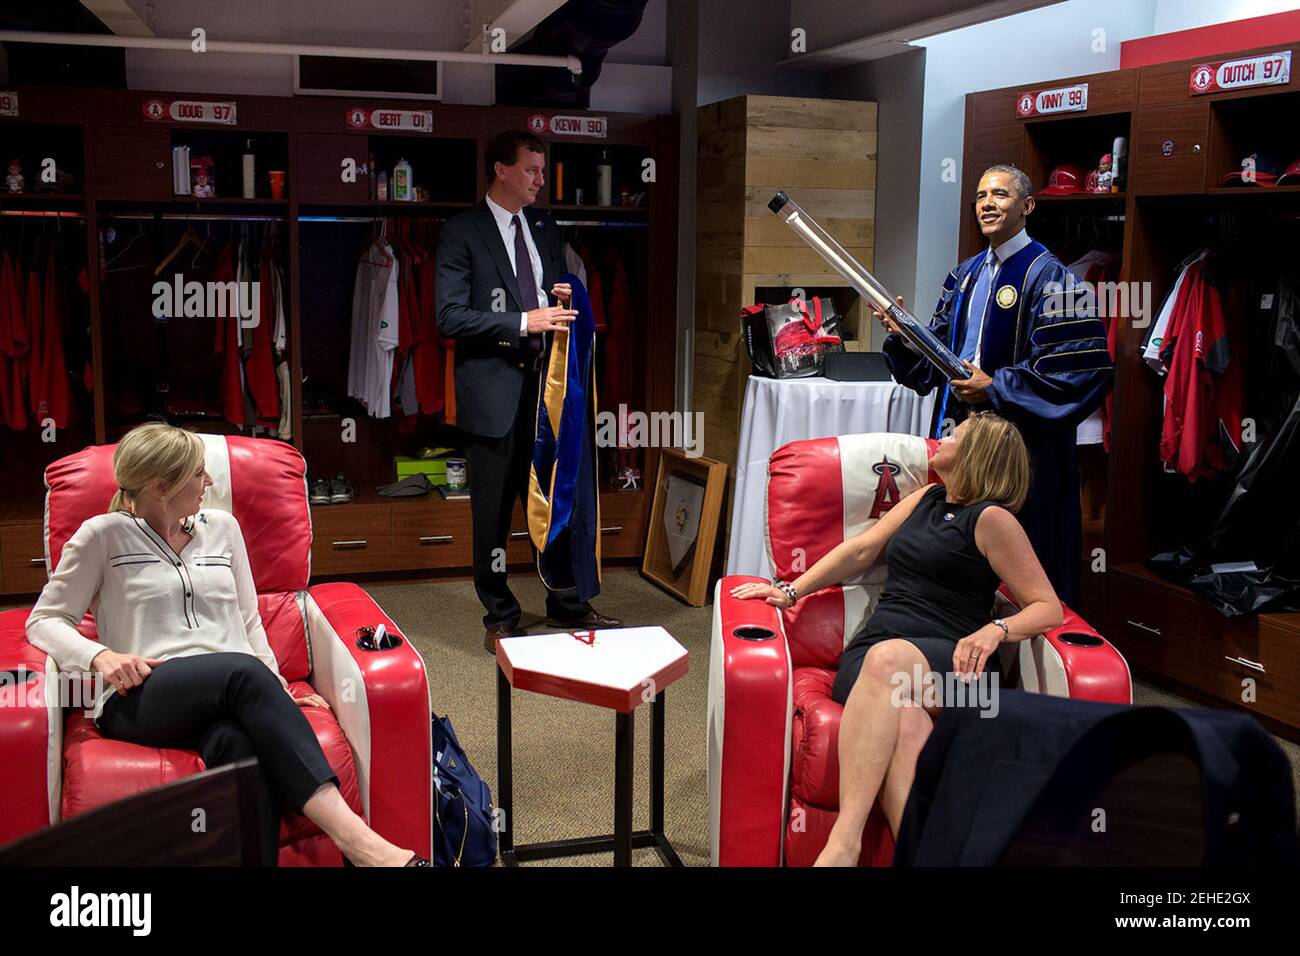 President Barack Obama holds a baseball bat  and jokes with staff in the locker room prior to the University of California, Irvine commencement ceremony at Angels Stadium of Anaheim in Anaheim, Calif., Saturday, June 14, 2014. From left are: Anita Decker Breckenridge, Deputy Chief of Staff for Operations, Trip Director Marvin Nicholson and Jennifer Palmieri, Director of Communications. Stock Photo